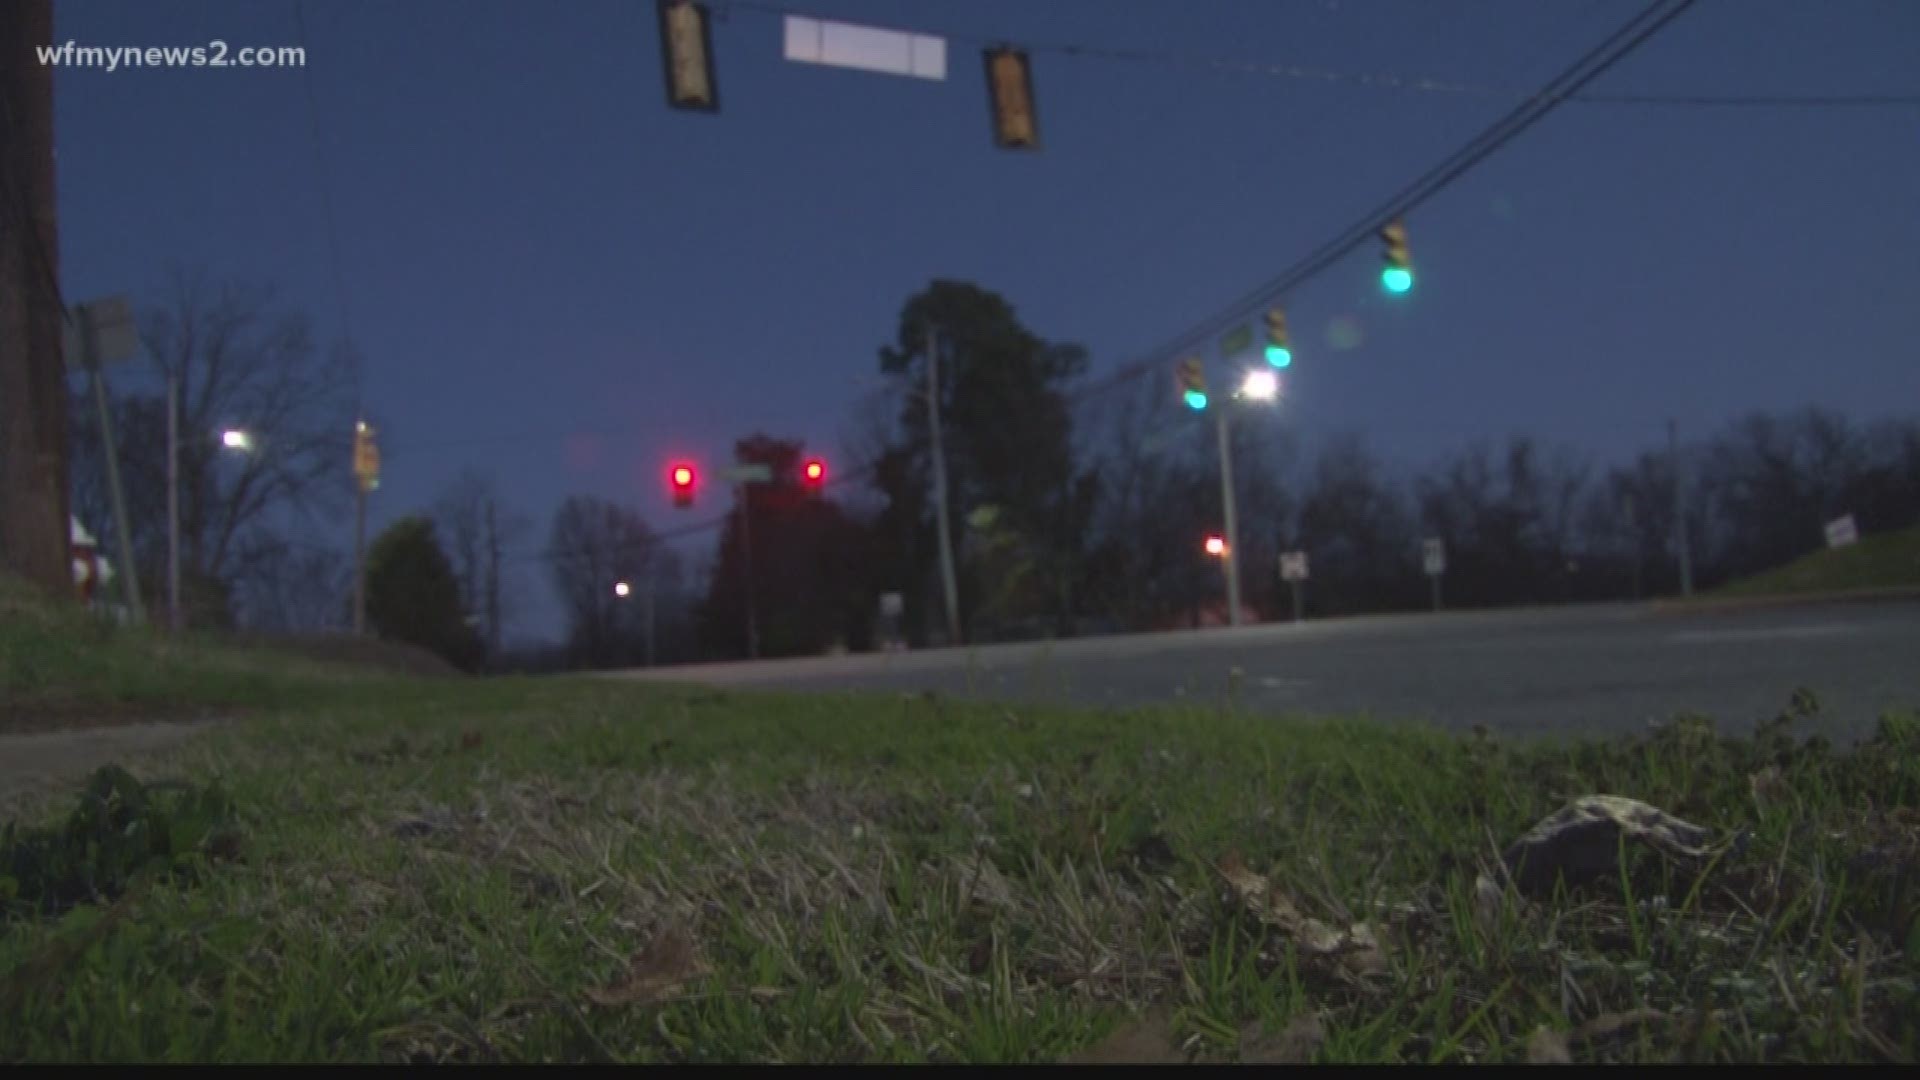 At 5:30 Thursday night, A 16 and 23-year-old were hit by a car. Their injuries are serious but not life-threatening.